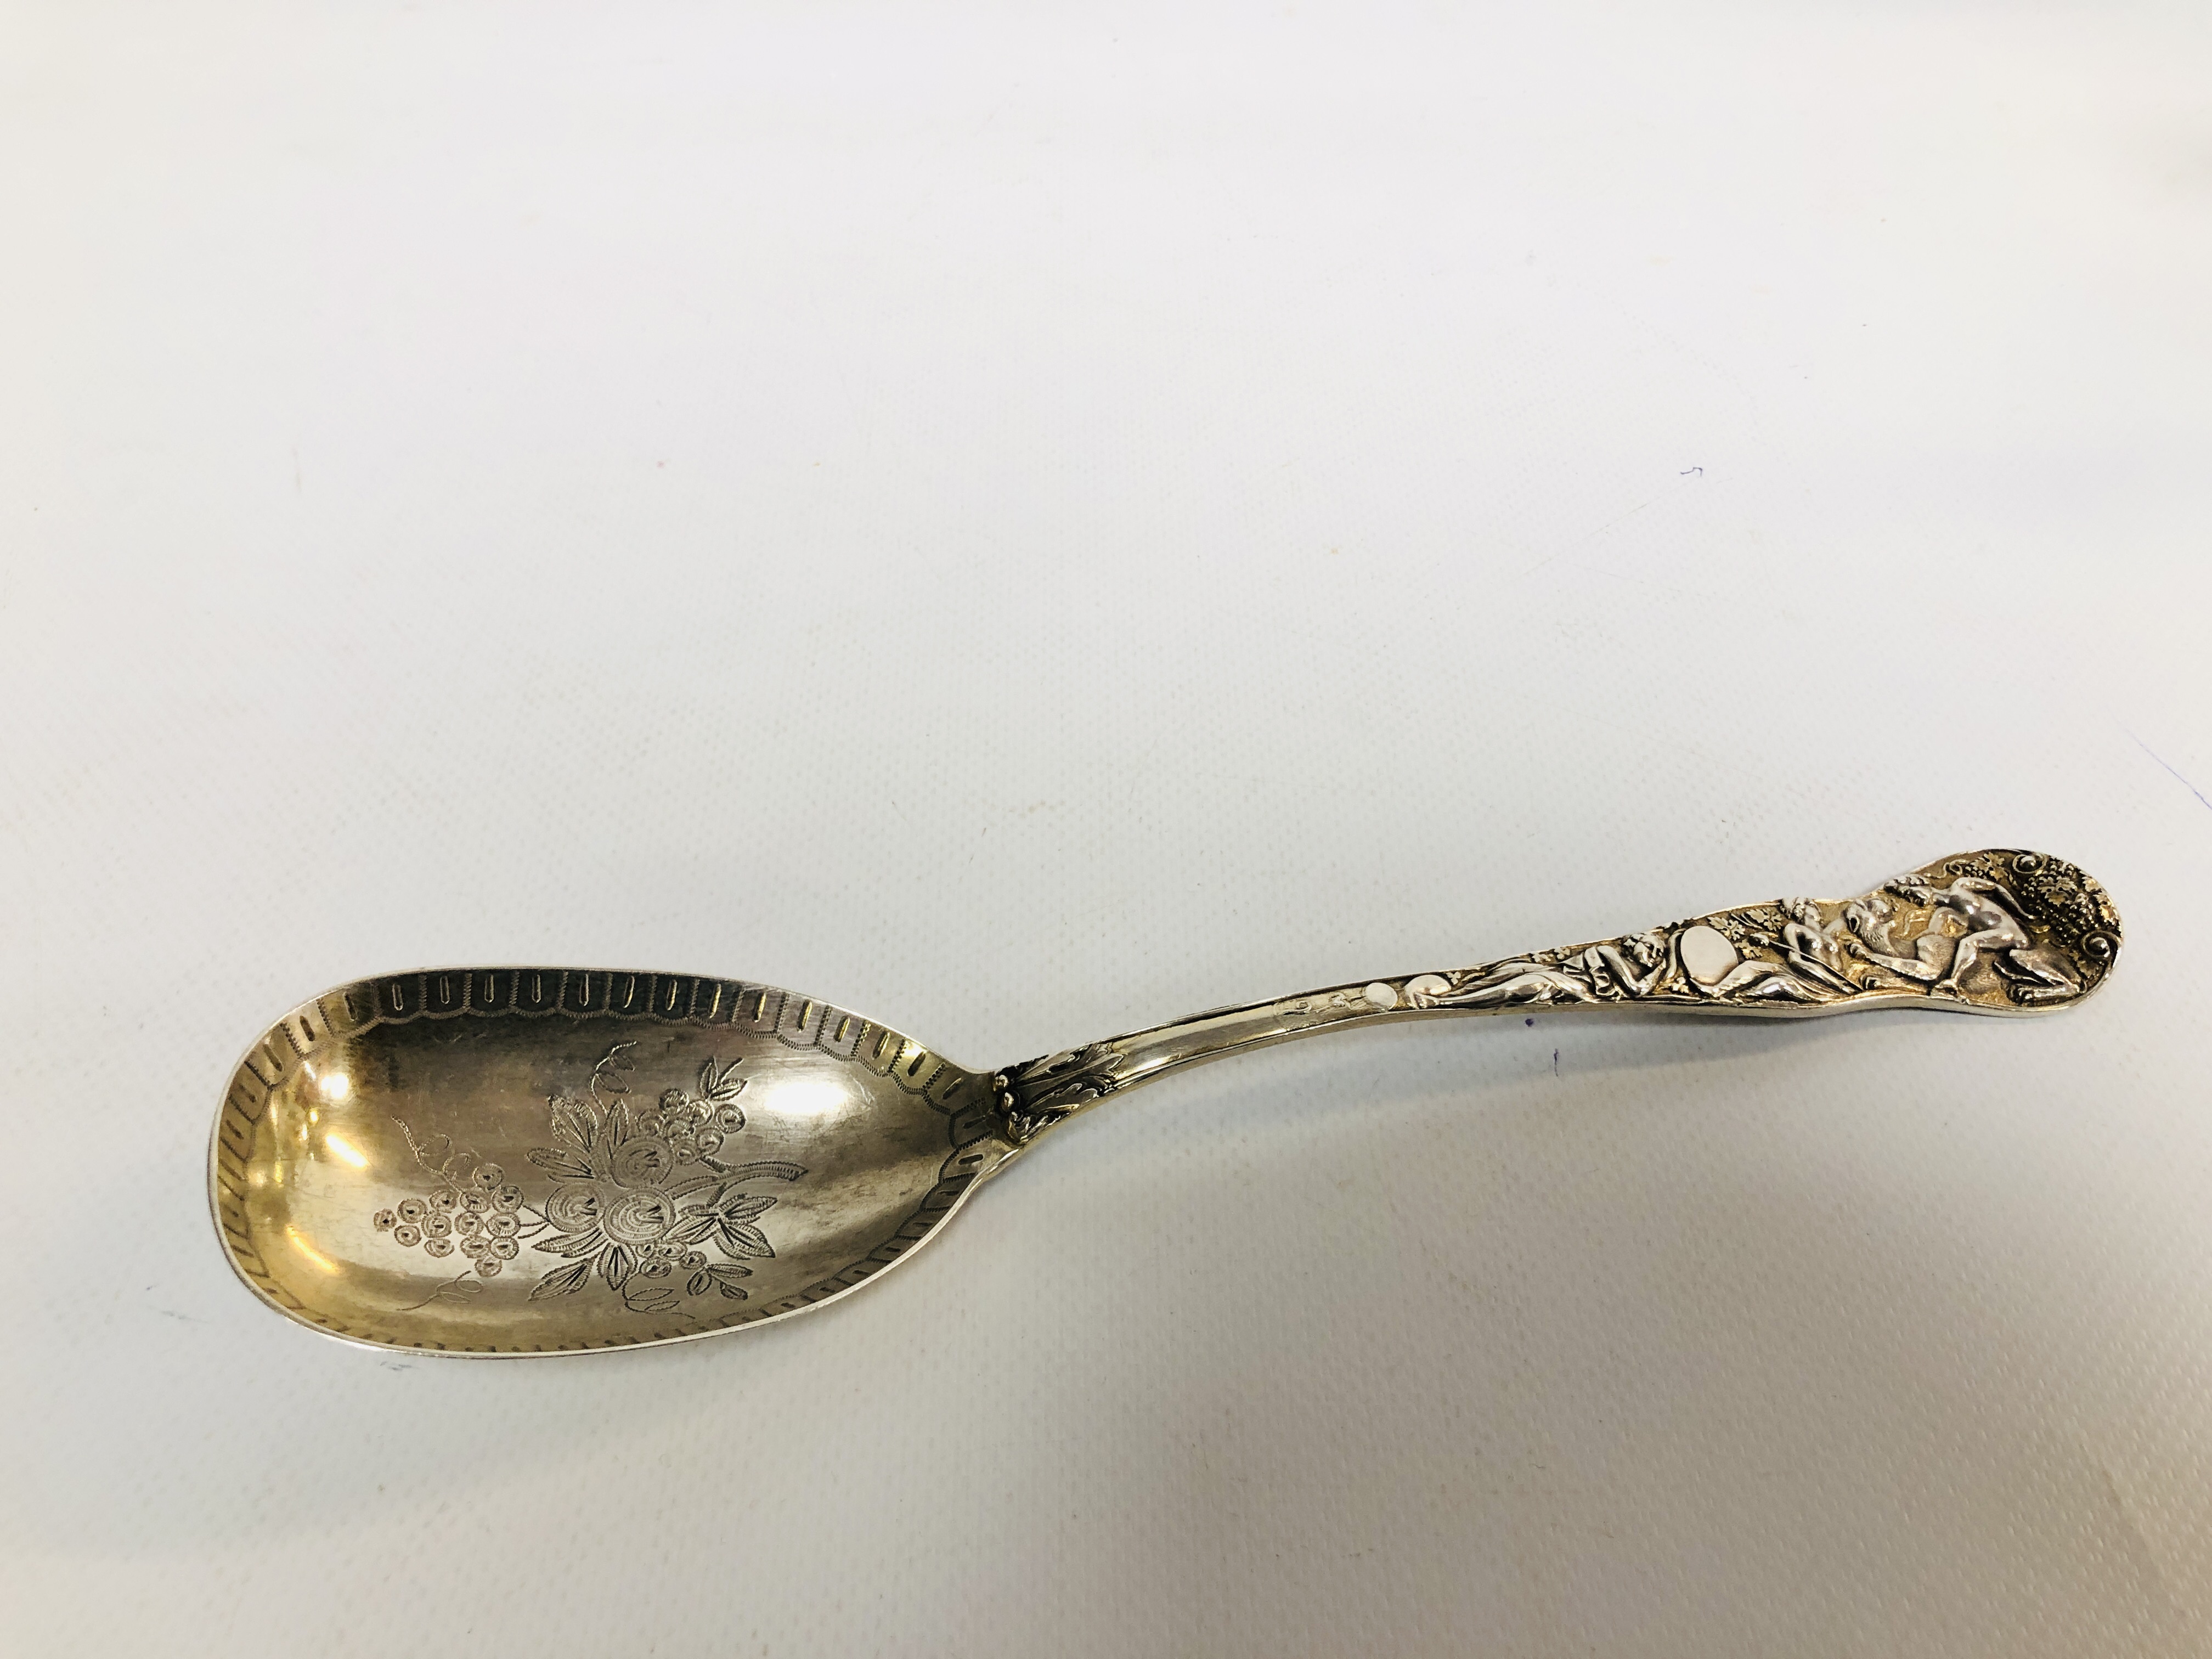 A VICTORIAN SILVER SERVING SPOON DECORATED WITH CLASSICAL FIGURES AND MYTHICAL CREATURES,